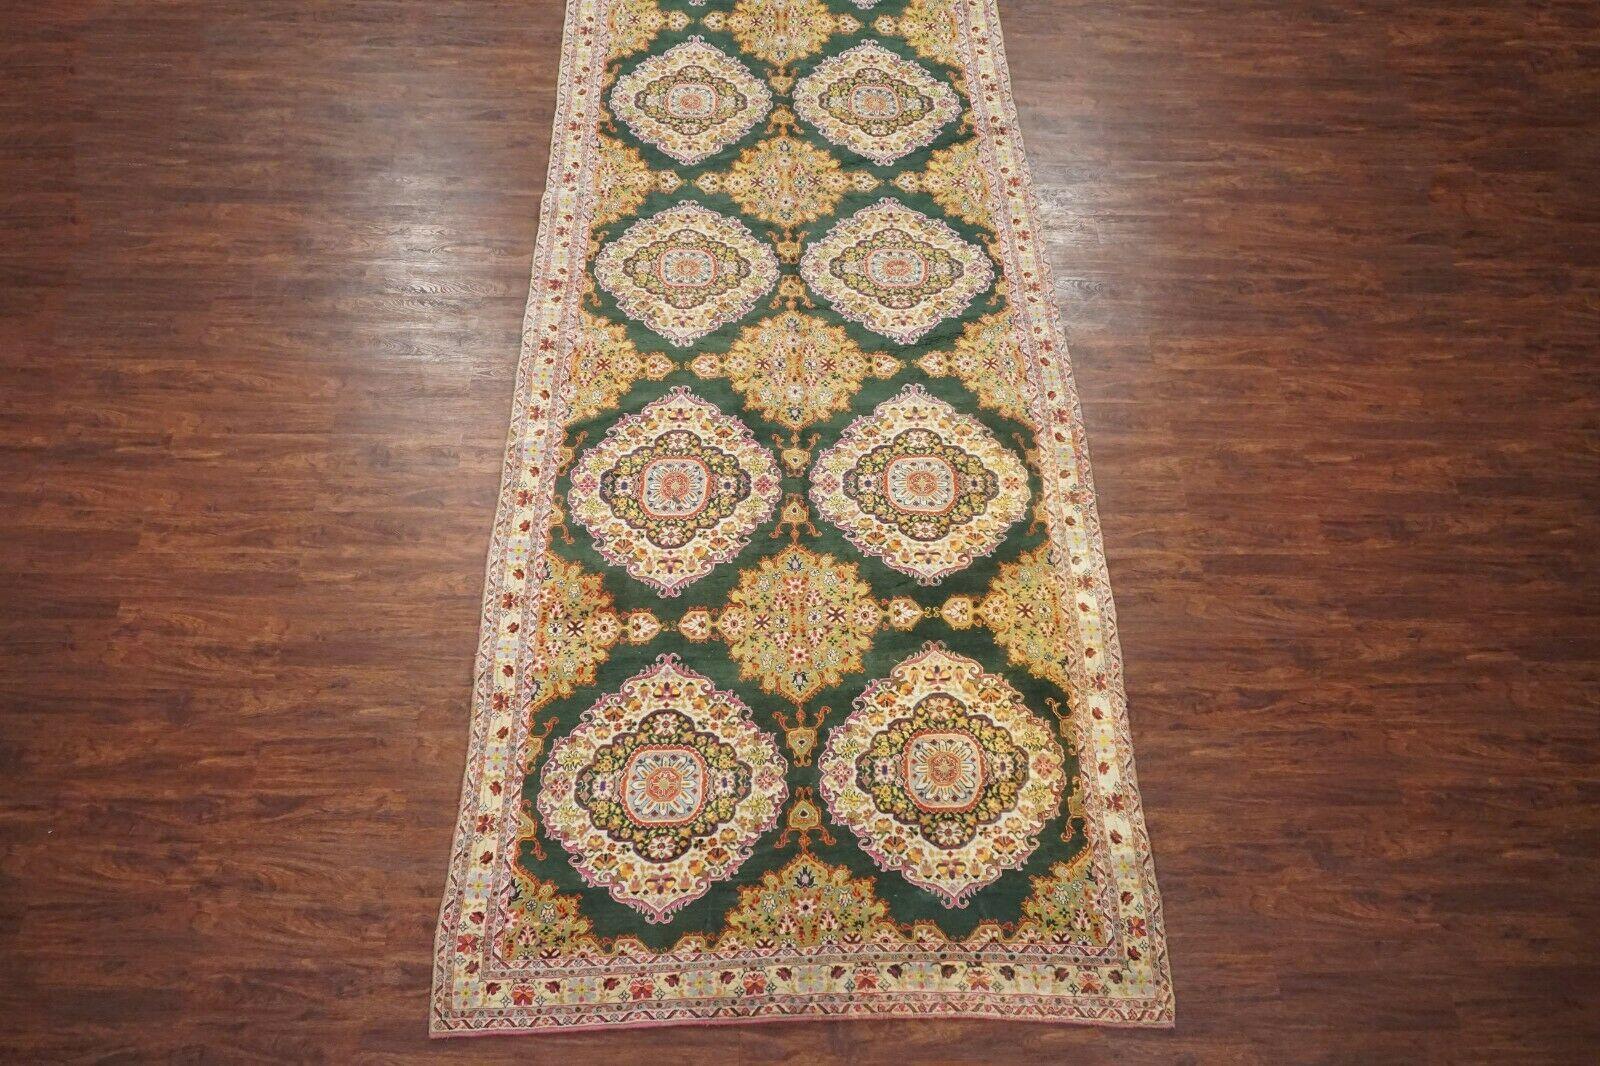 Hand-knotted cotton pile on a cotton foundation.

Circa 1900 

Dimensions: 6' x 20'10